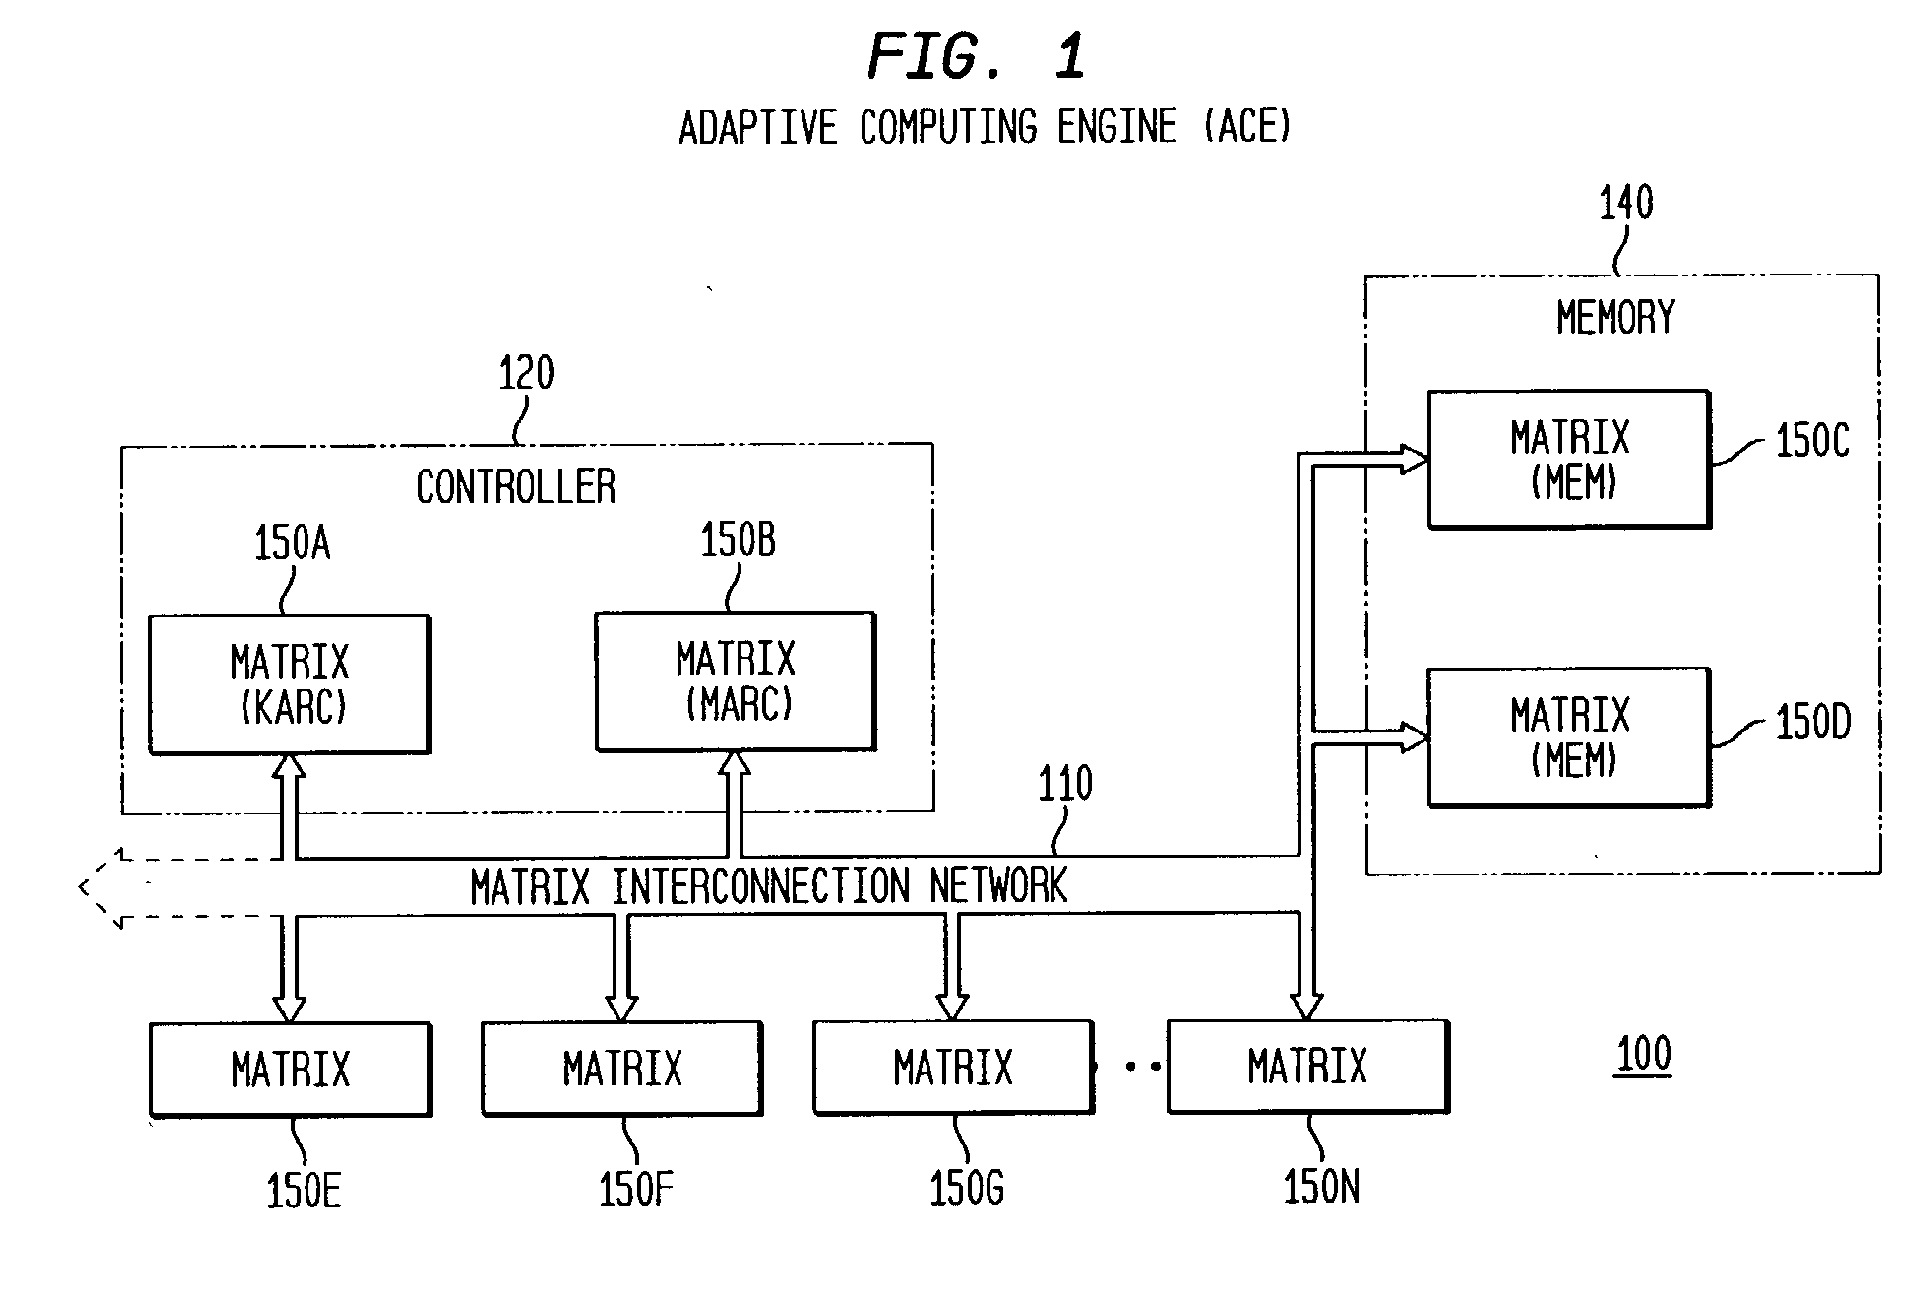 Method, System and Program for Developing and Scheduling Adaptive Integrated Circuitry and Corresponding Control or Configuration Information